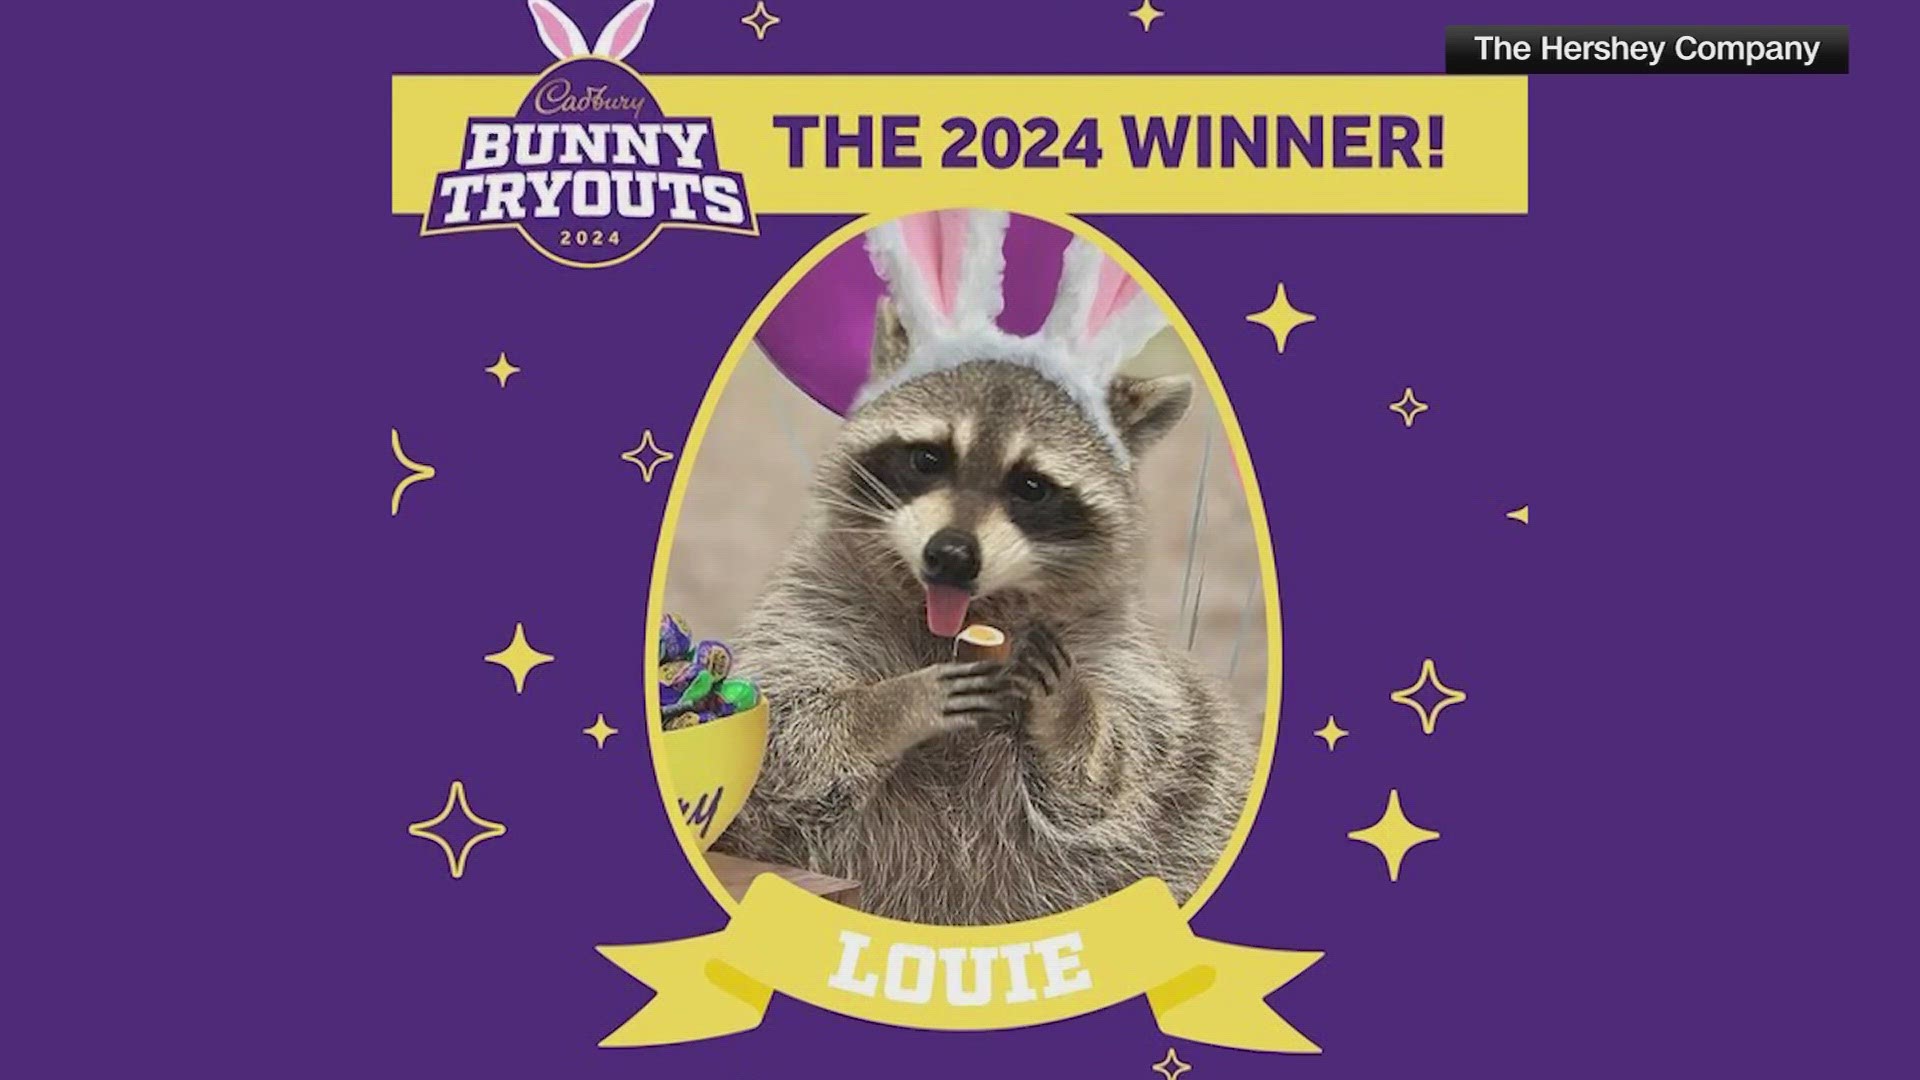 Louie won $7,000 and gets a chance to be in a Cadbury commercial.